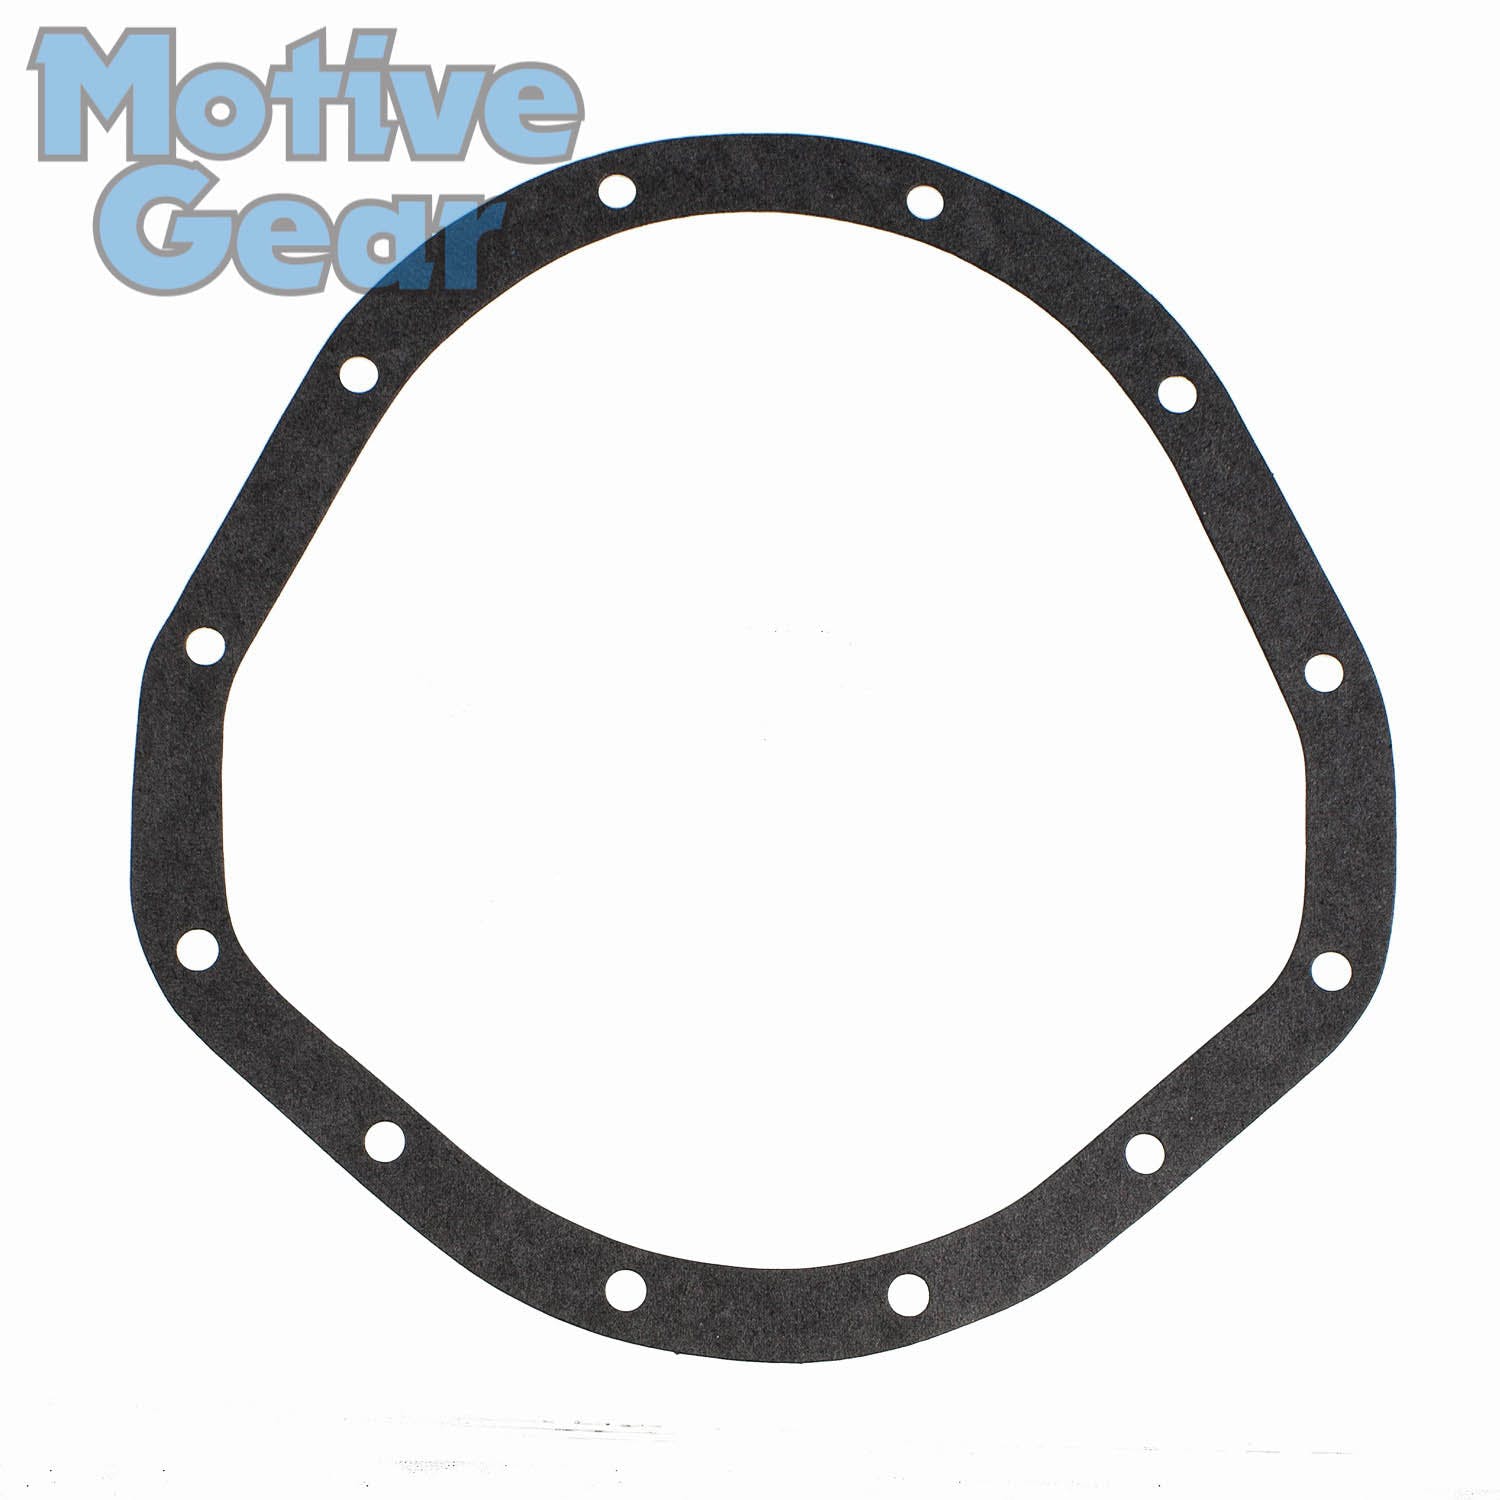 Motive Gear 5105 Differential Cover Gasket